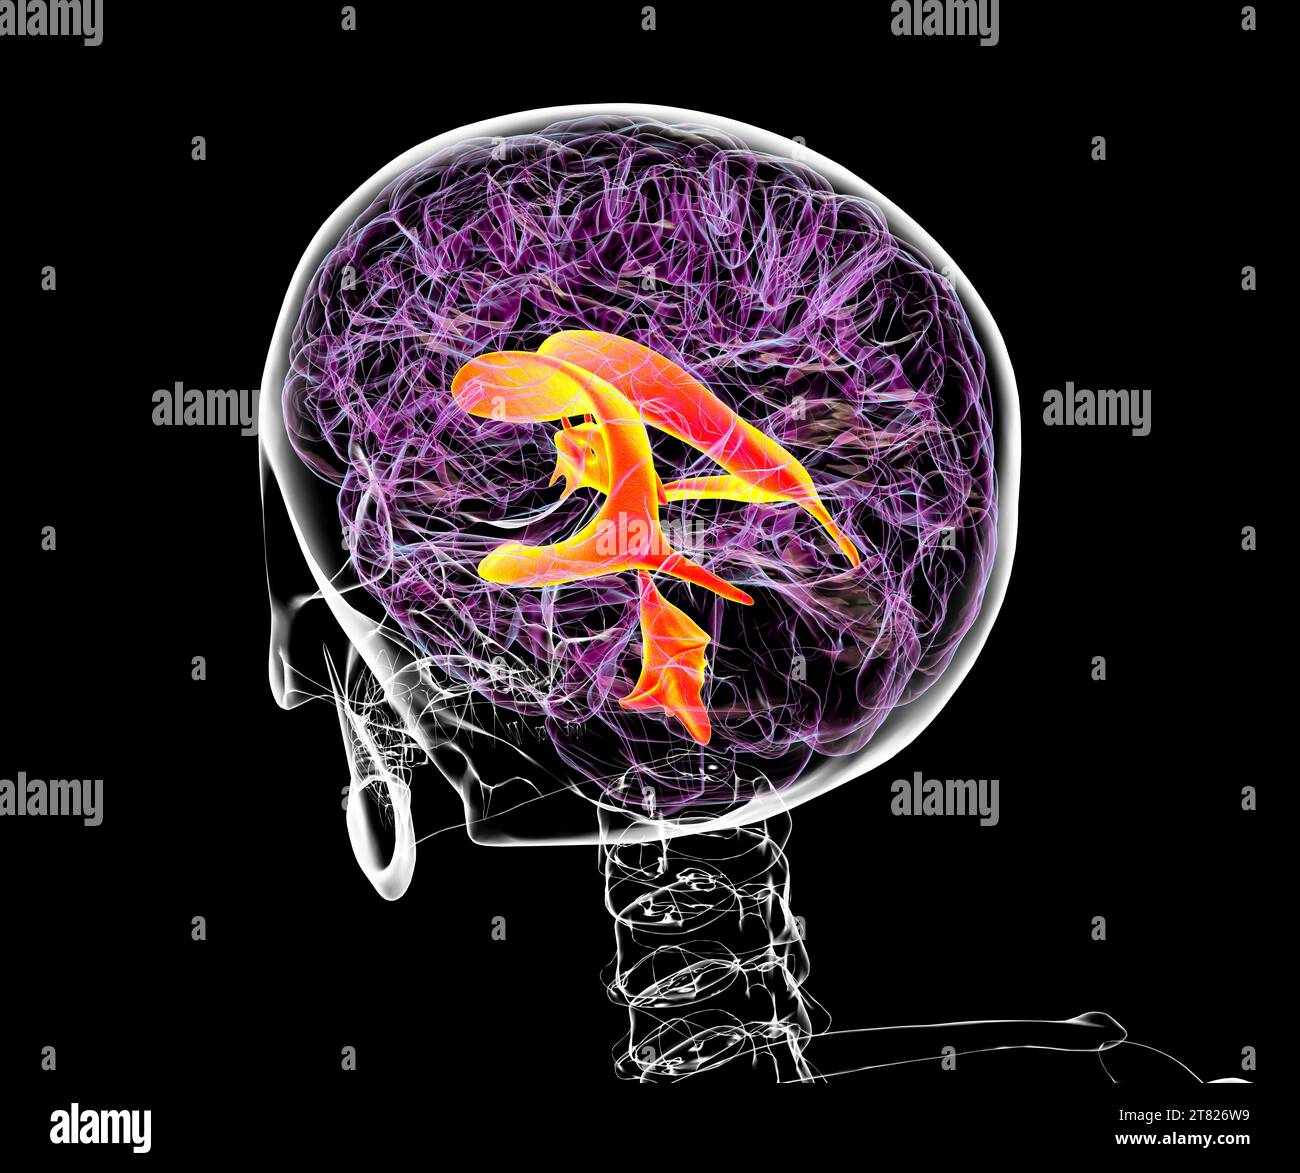 Ventricular system of the brain, illustration Stock Photo